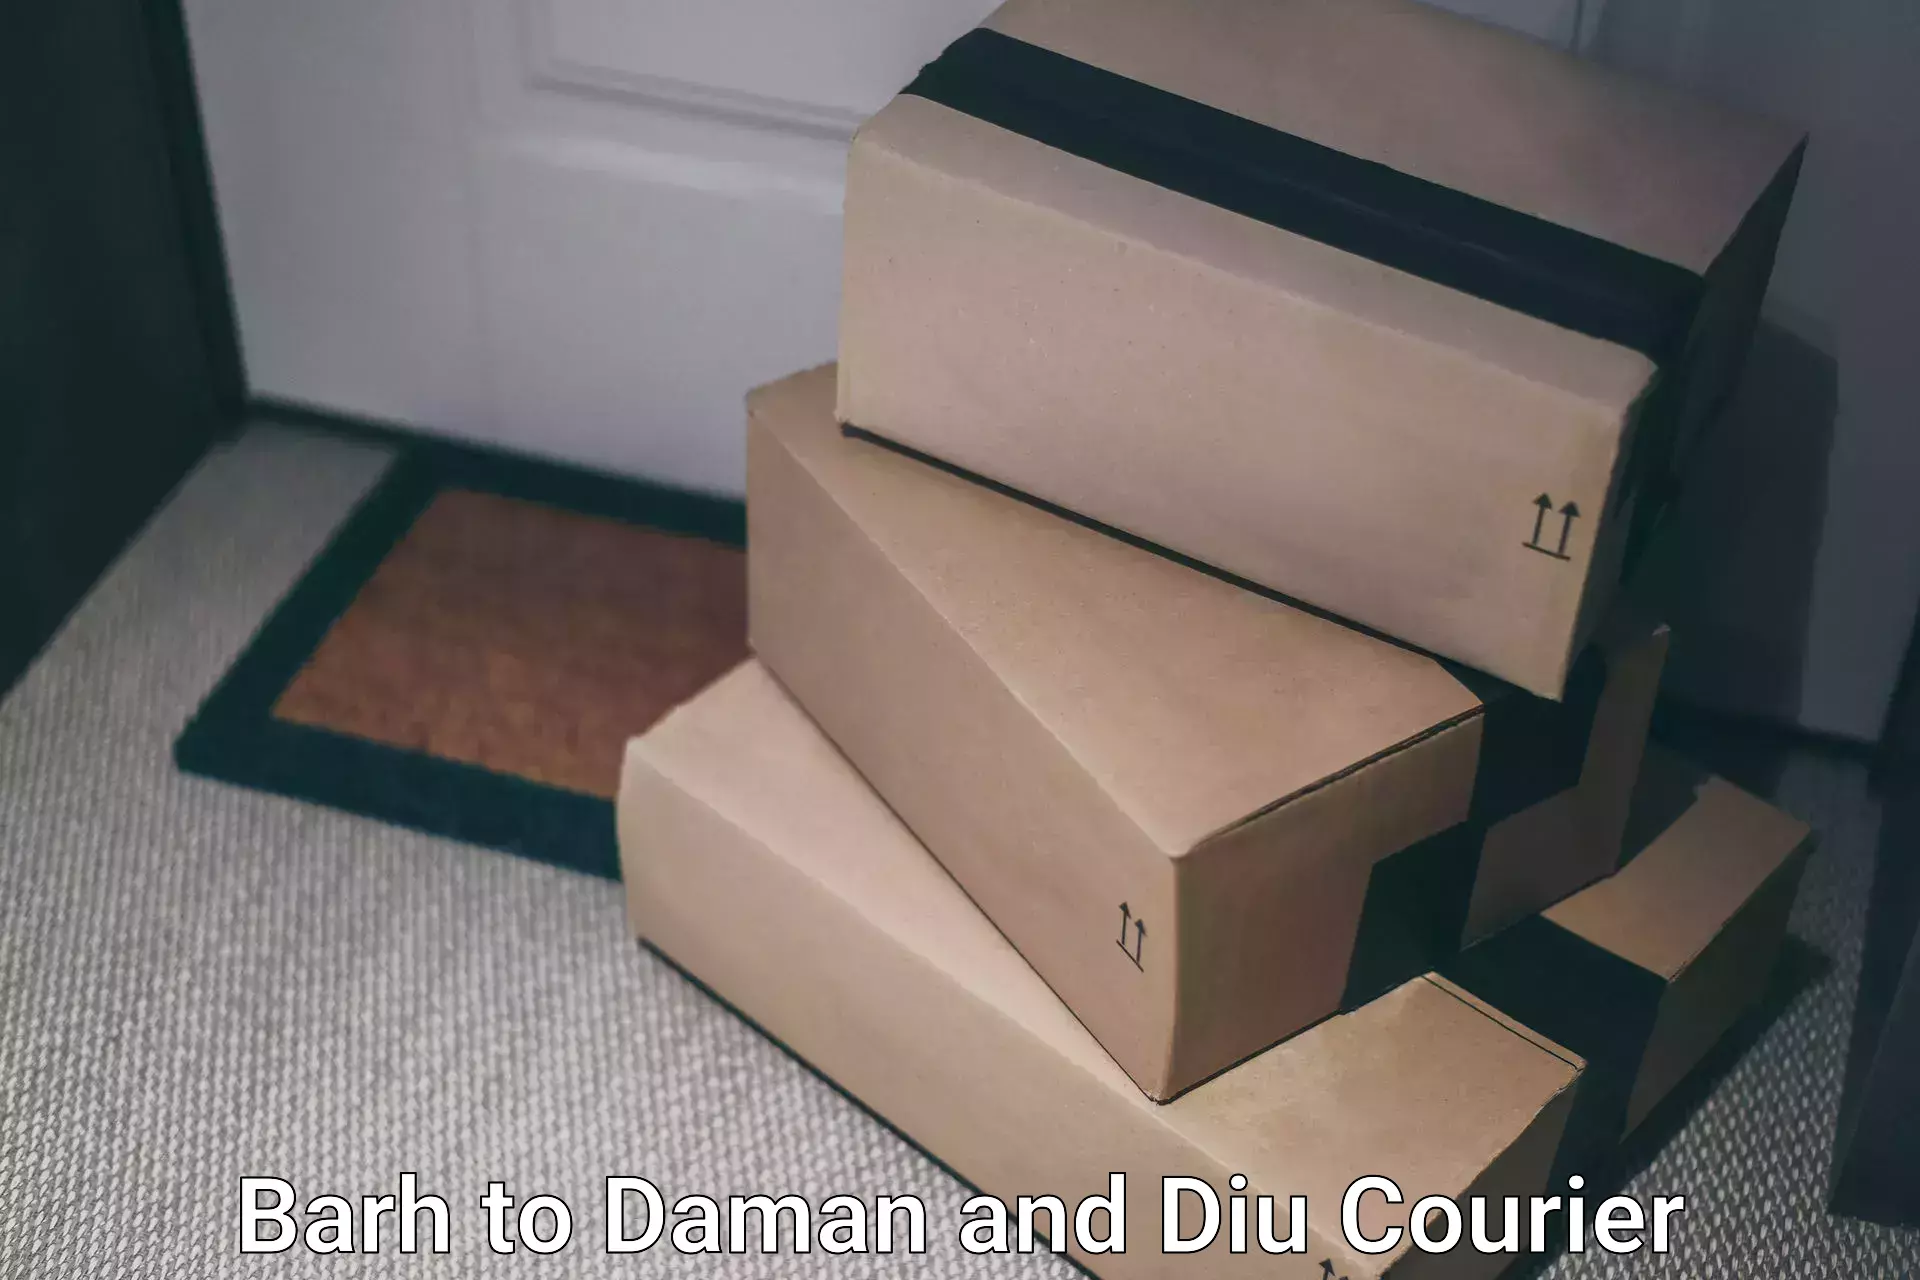 User-friendly courier app Barh to Daman and Diu